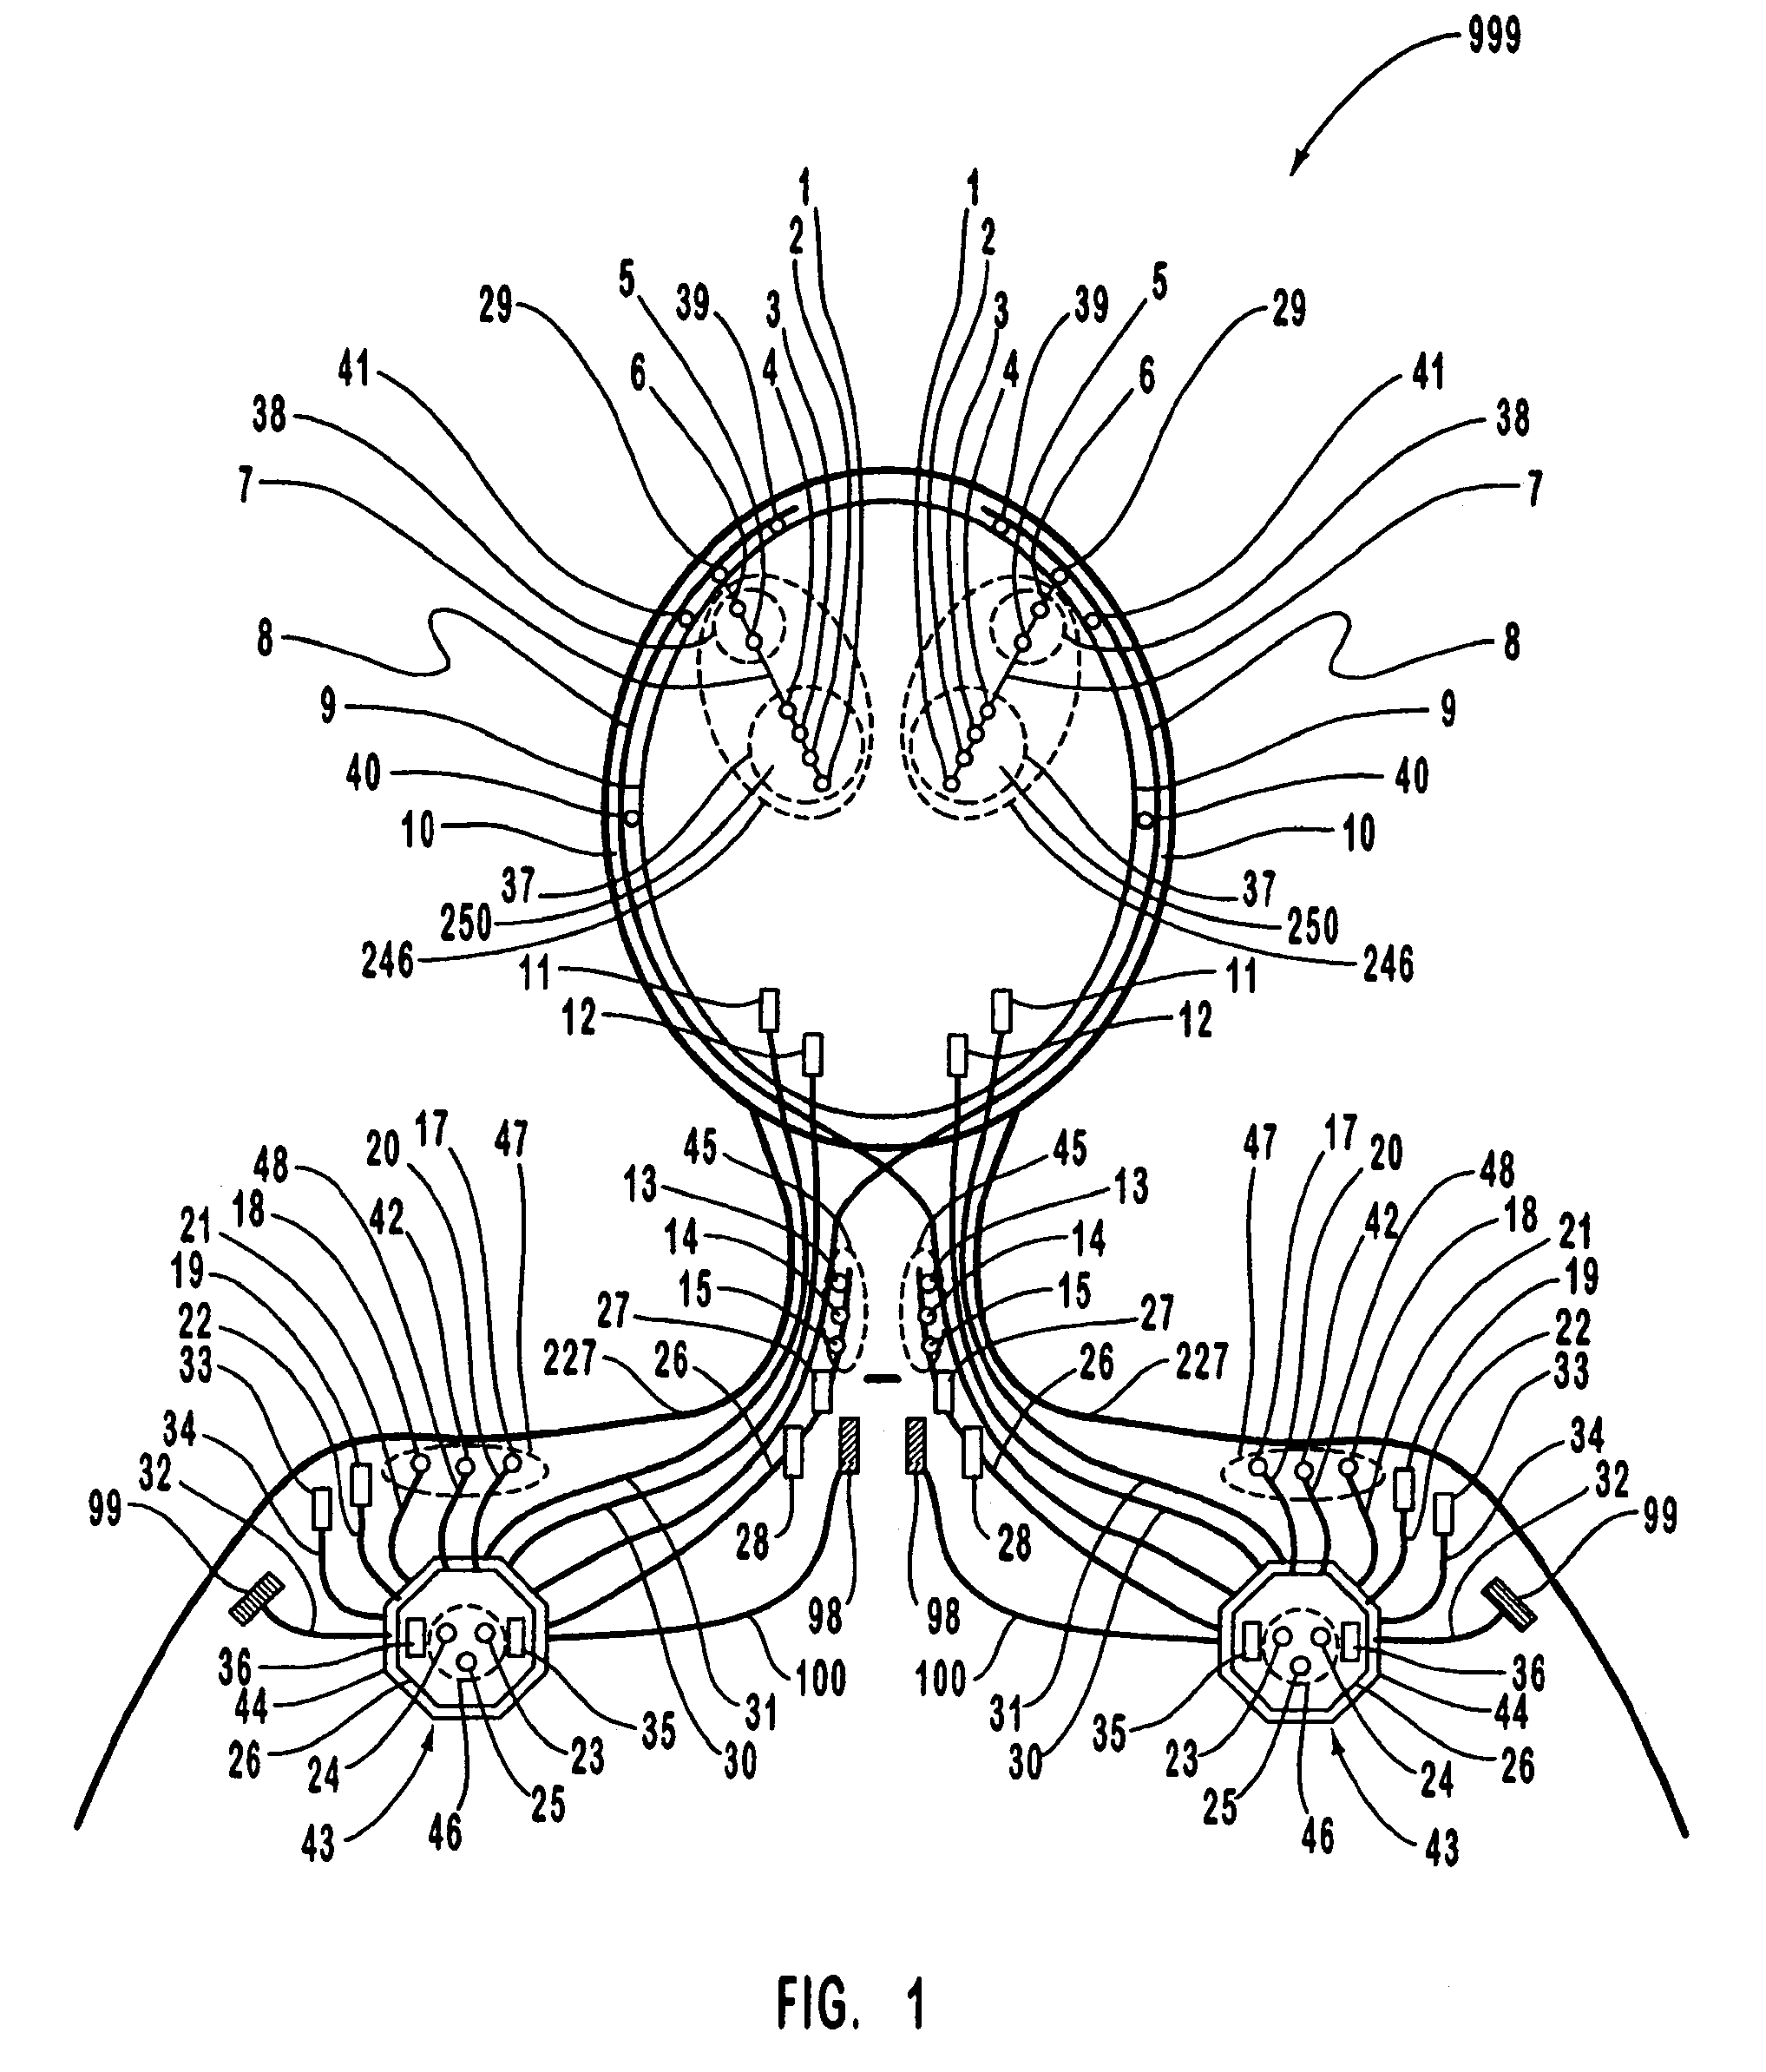 Systems and methods for monitoring a patient's neurological disease state